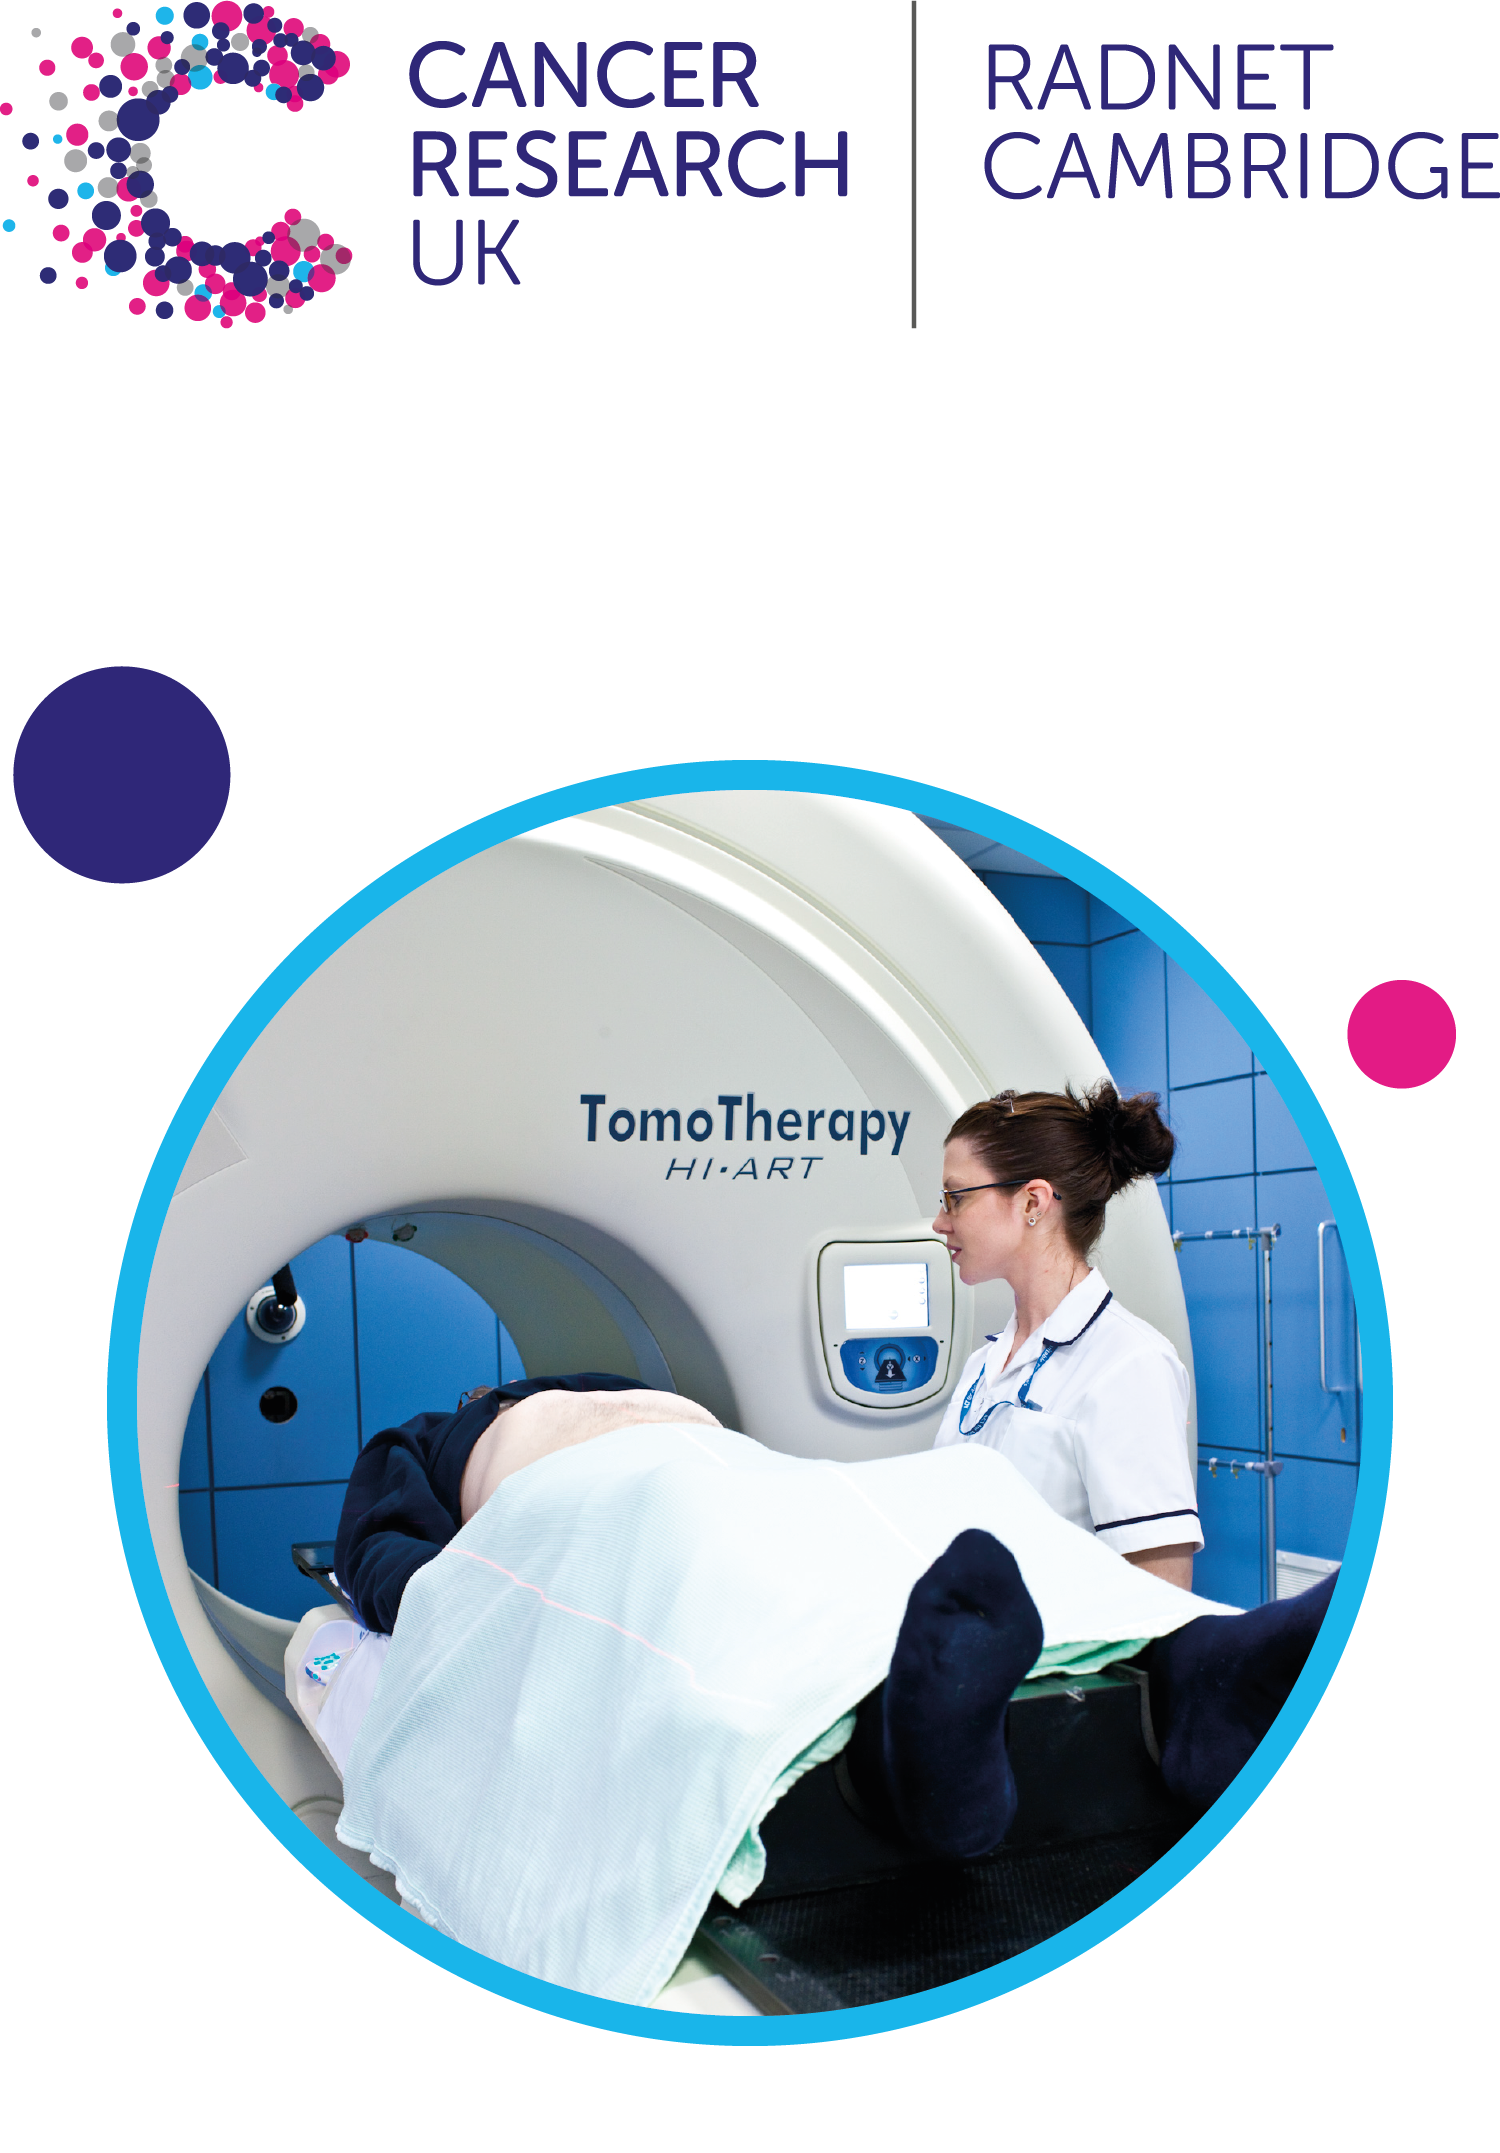 A patient receiving radiotherapy treatment at Addenbrooke's Hospital in Cambridge.